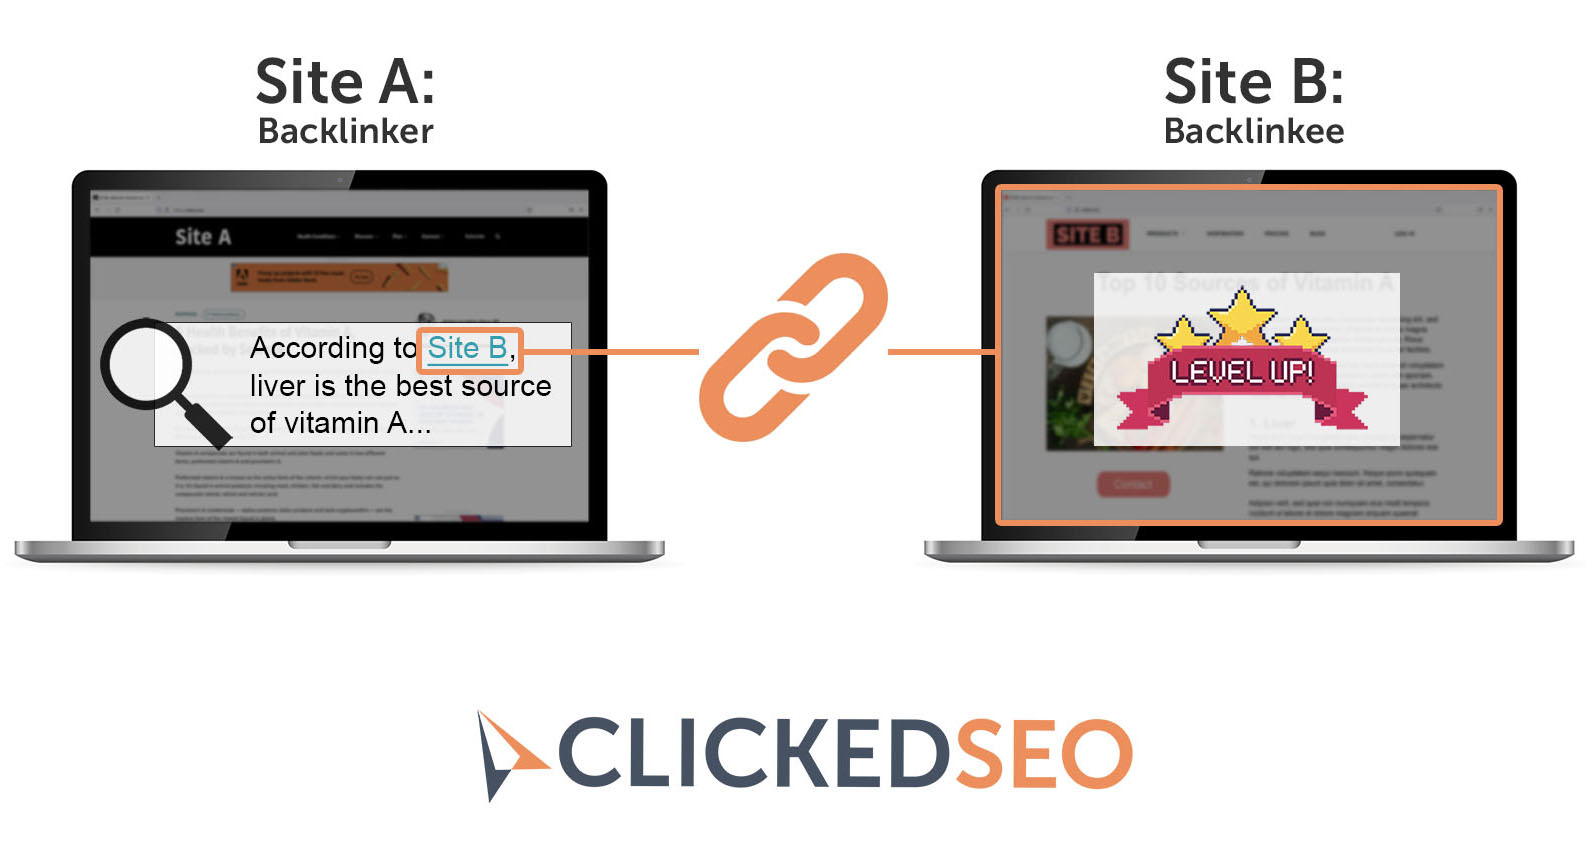 infographic illustrating what an SEO backlink is. It contains 2 laptops, the laptop on the left, the backlinker, shows "Site A" with text "according to site b, liver is the best source of vitamin A". A link draws to the right image, site B, the backlinkee. Site B backlinkee shows text "level up".